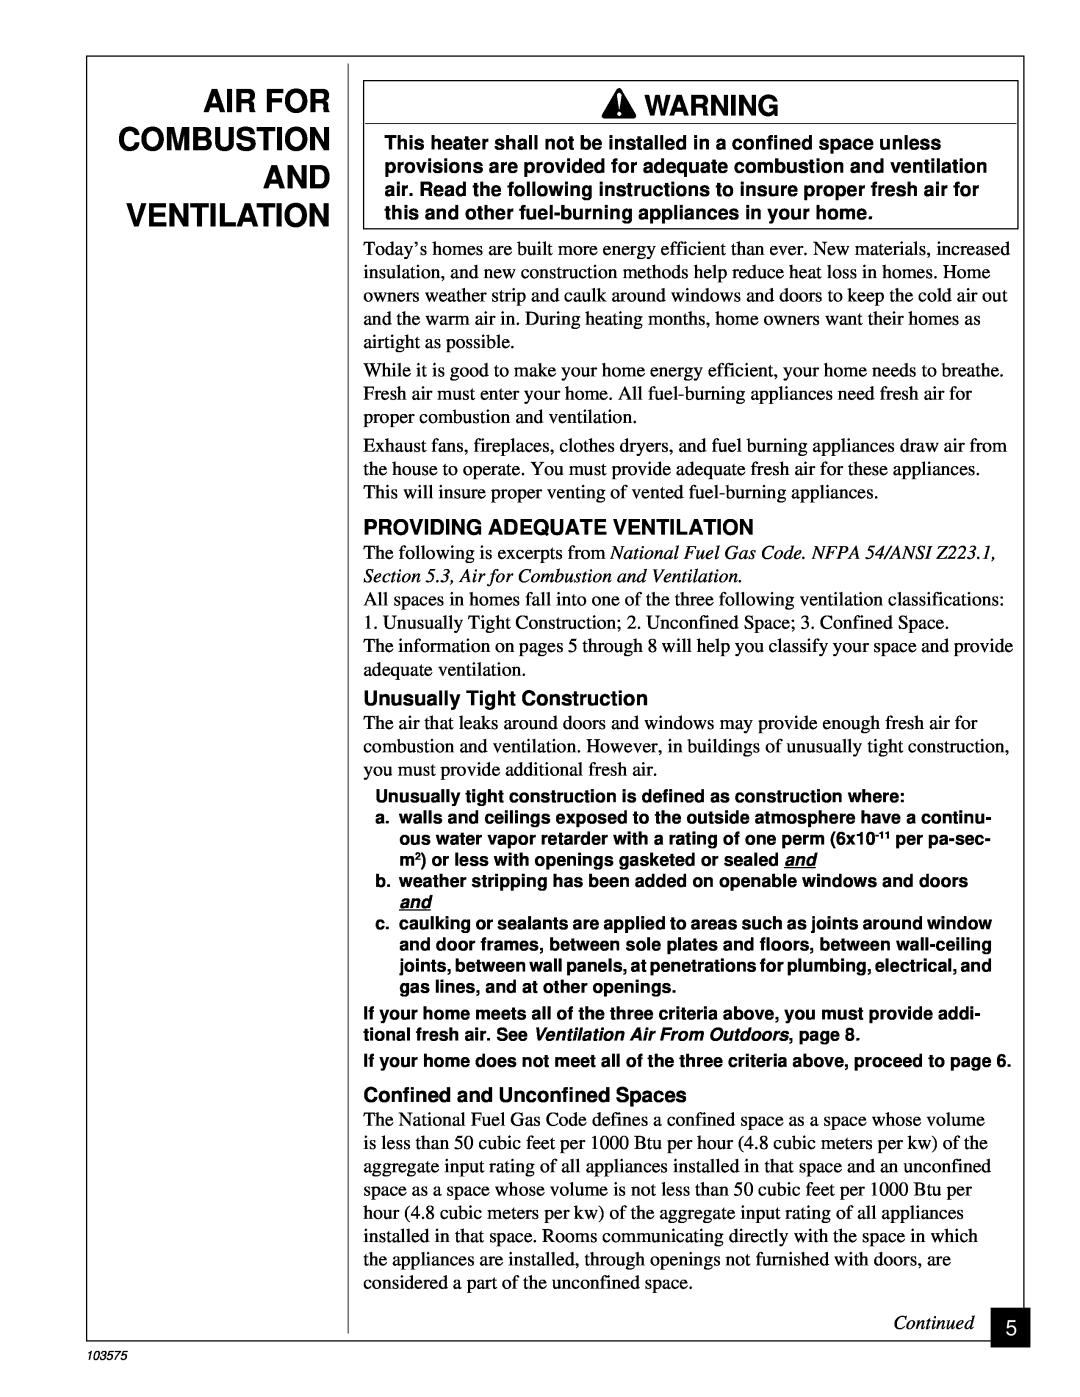 Desa CGP10TL installation manual Air For Combustion And Ventilation, Providing Adequate Ventilation, Continued 